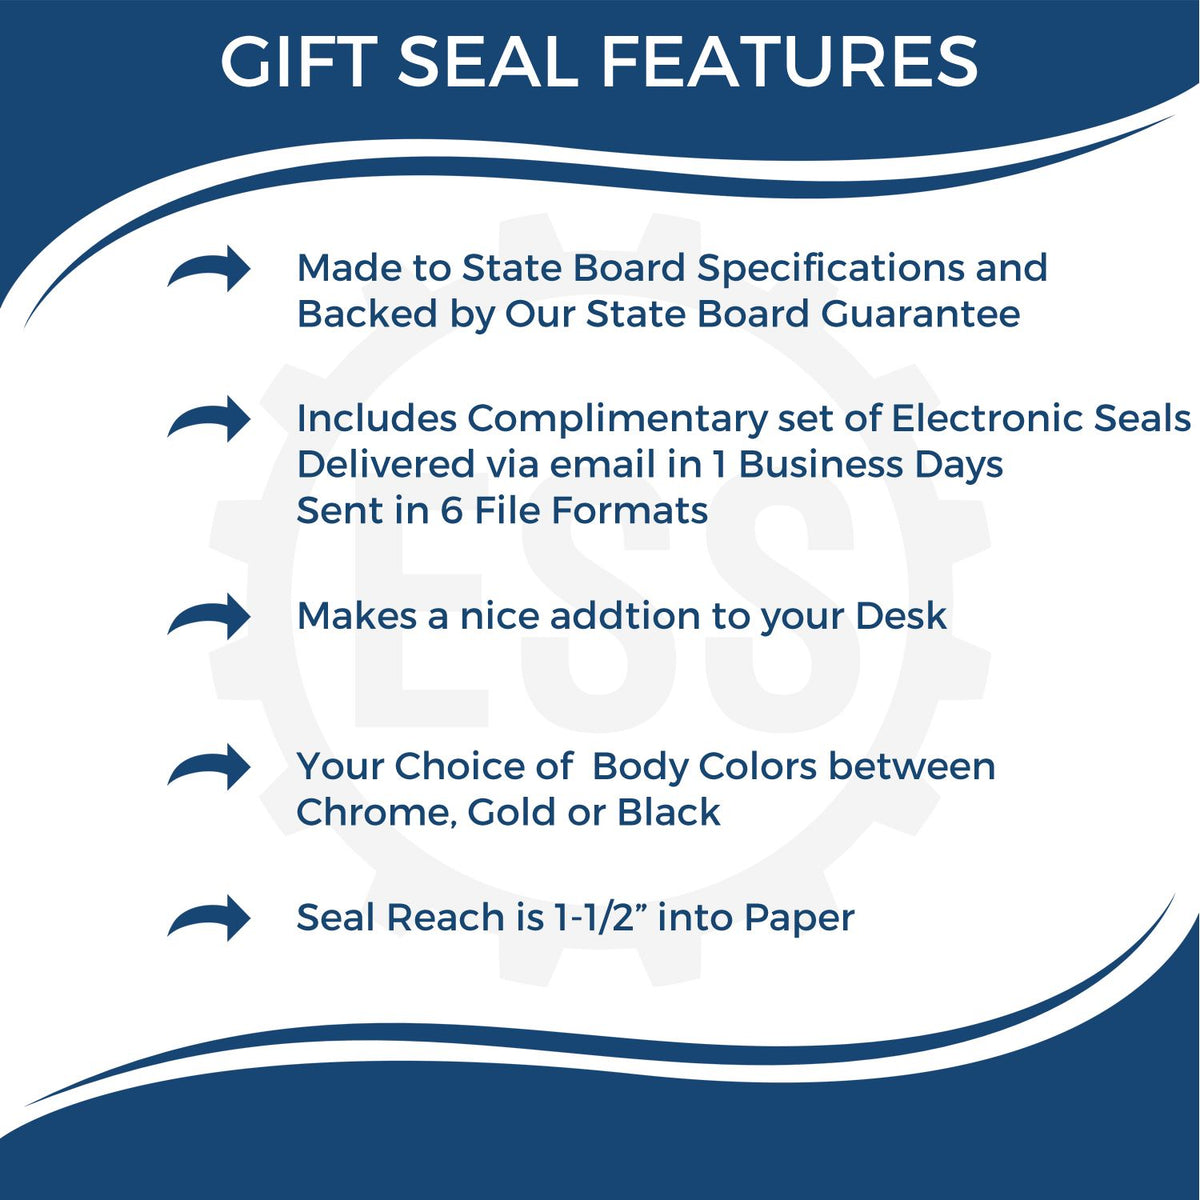 A picture of an infographic highlighting the selling points for the Gift Texas Land Surveyor Seal